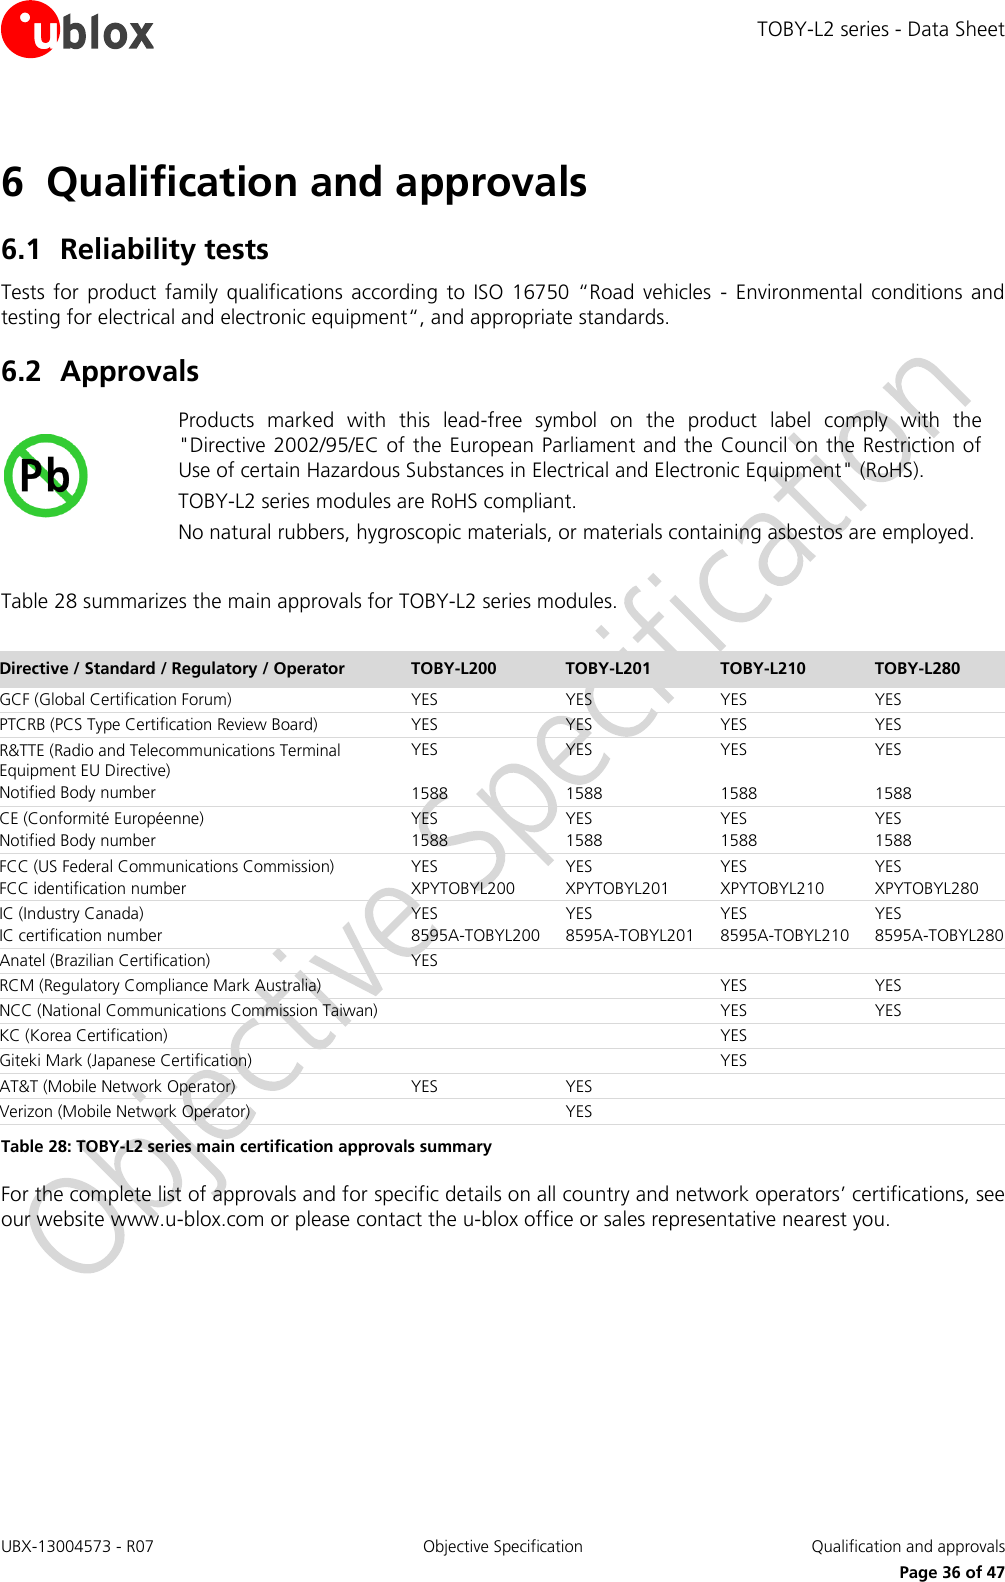 TOBY-L2 series - Data Sheet UBX-13004573 - R07  Objective Specification  Qualification and approvals   Page 36 of 47 6 Qualification and approvals 6.1 Reliability tests Tests  for  product  family  qualifications  according  to  ISO  16750  “Road  vehicles  - Environmental  conditions  and testing for electrical and electronic equipment“, and appropriate standards. 6.2 Approvals  Products  marked  with  this  lead-free  symbol  on  the  product  label  comply  with  the &quot;Directive 2002/95/EC of the European Parliament and the Council on the Restriction of Use of certain Hazardous Substances in Electrical and Electronic Equipment&quot; (RoHS). TOBY-L2 series modules are RoHS compliant. No natural rubbers, hygroscopic materials, or materials containing asbestos are employed.  Table 28 summarizes the main approvals for TOBY-L2 series modules.  Directive / Standard / Regulatory / Operator TOBY-L200 TOBY-L201 TOBY-L210 TOBY-L280 GCF (Global Certification Forum) YES YES YES YES PTCRB (PCS Type Certification Review Board) YES YES YES YES R&amp;TTE (Radio and Telecommunications Terminal Equipment EU Directive) Notified Body number YES  1588 YES  1588 YES  1588 YES  1588 CE (Conformité Européenne) Notified Body number YES 1588 YES 1588 YES 1588 YES 1588 FCC (US Federal Communications Commission) FCC identification number YES XPYTOBYL200 YES XPYTOBYL201 YES XPYTOBYL210 YES XPYTOBYL280 IC (Industry Canada) IC certification number YES 8595A-TOBYL200 YES 8595A-TOBYL201 YES 8595A-TOBYL210 YES 8595A-TOBYL280 Anatel (Brazilian Certification) YES    RCM (Regulatory Compliance Mark Australia)    YES YES NCC (National Communications Commission Taiwan)   YES YES KC (Korea Certification)   YES  Giteki Mark (Japanese Certification)   YES  AT&amp;T (Mobile Network Operator) YES YES   Verizon (Mobile Network Operator)  YES   Table 28: TOBY-L2 series main certification approvals summary For the complete list of approvals and for specific details on all country and network operators’ certifications, see our website www.u-blox.com or please contact the u-blox office or sales representative nearest you.  